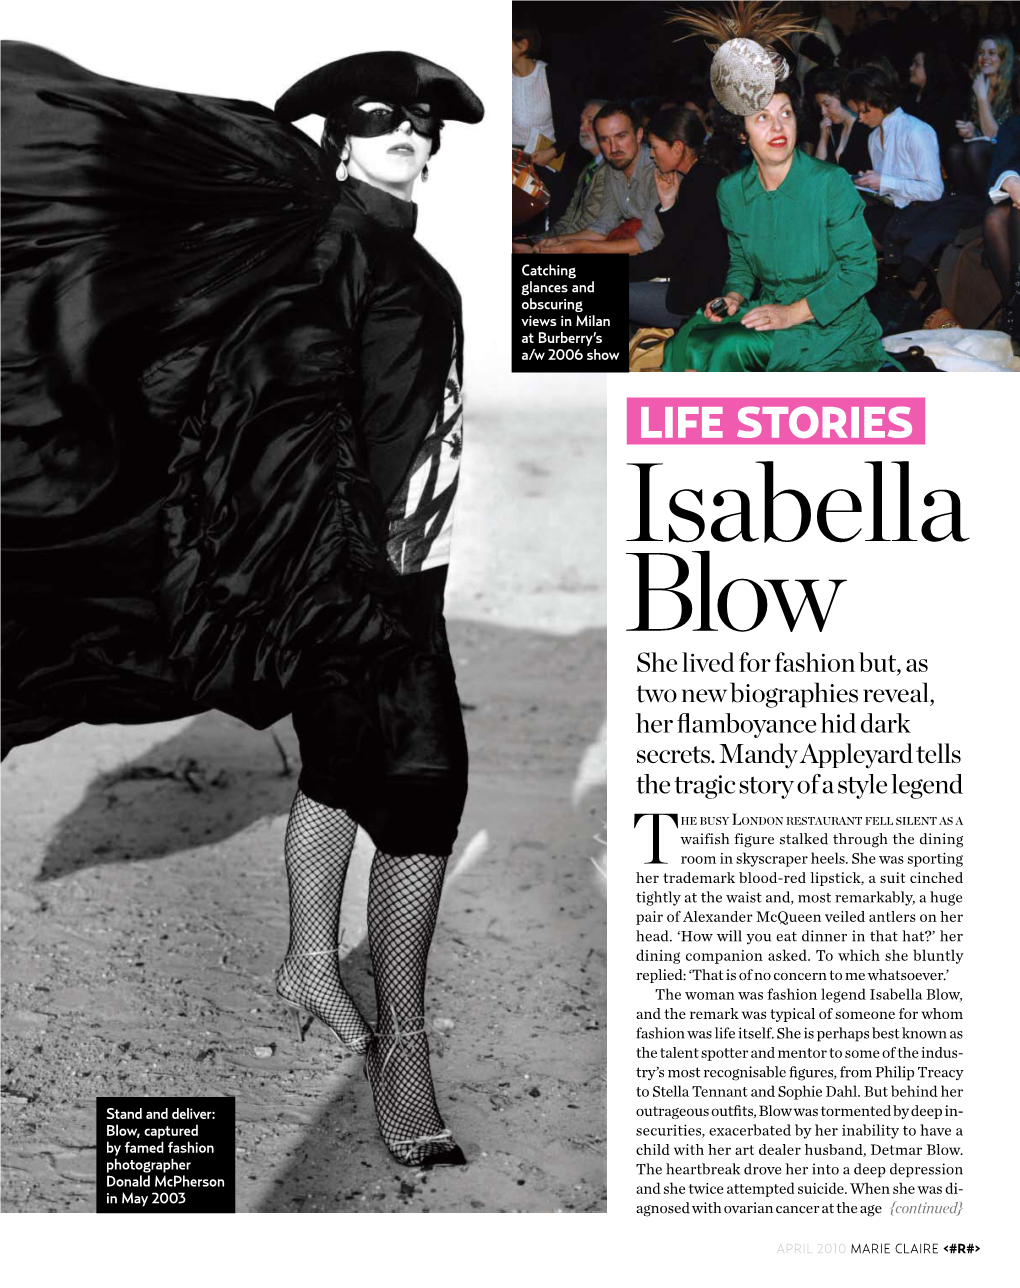 Isabella Blow She Lived for Fashion But, As Two New Biographies Reveal, Her Flamboyance Hid Dark Secrets